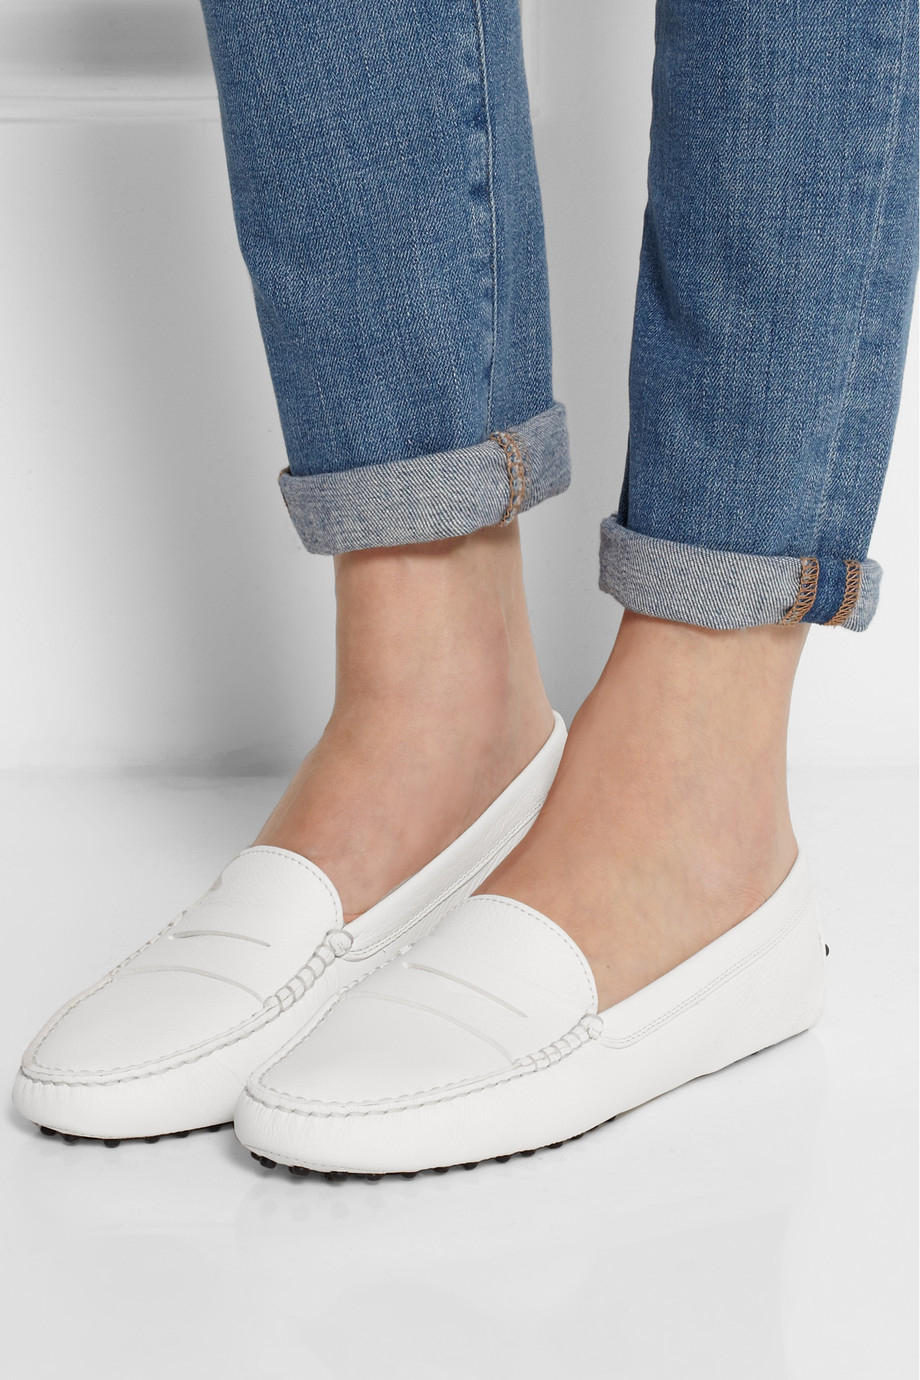 tods shoes white